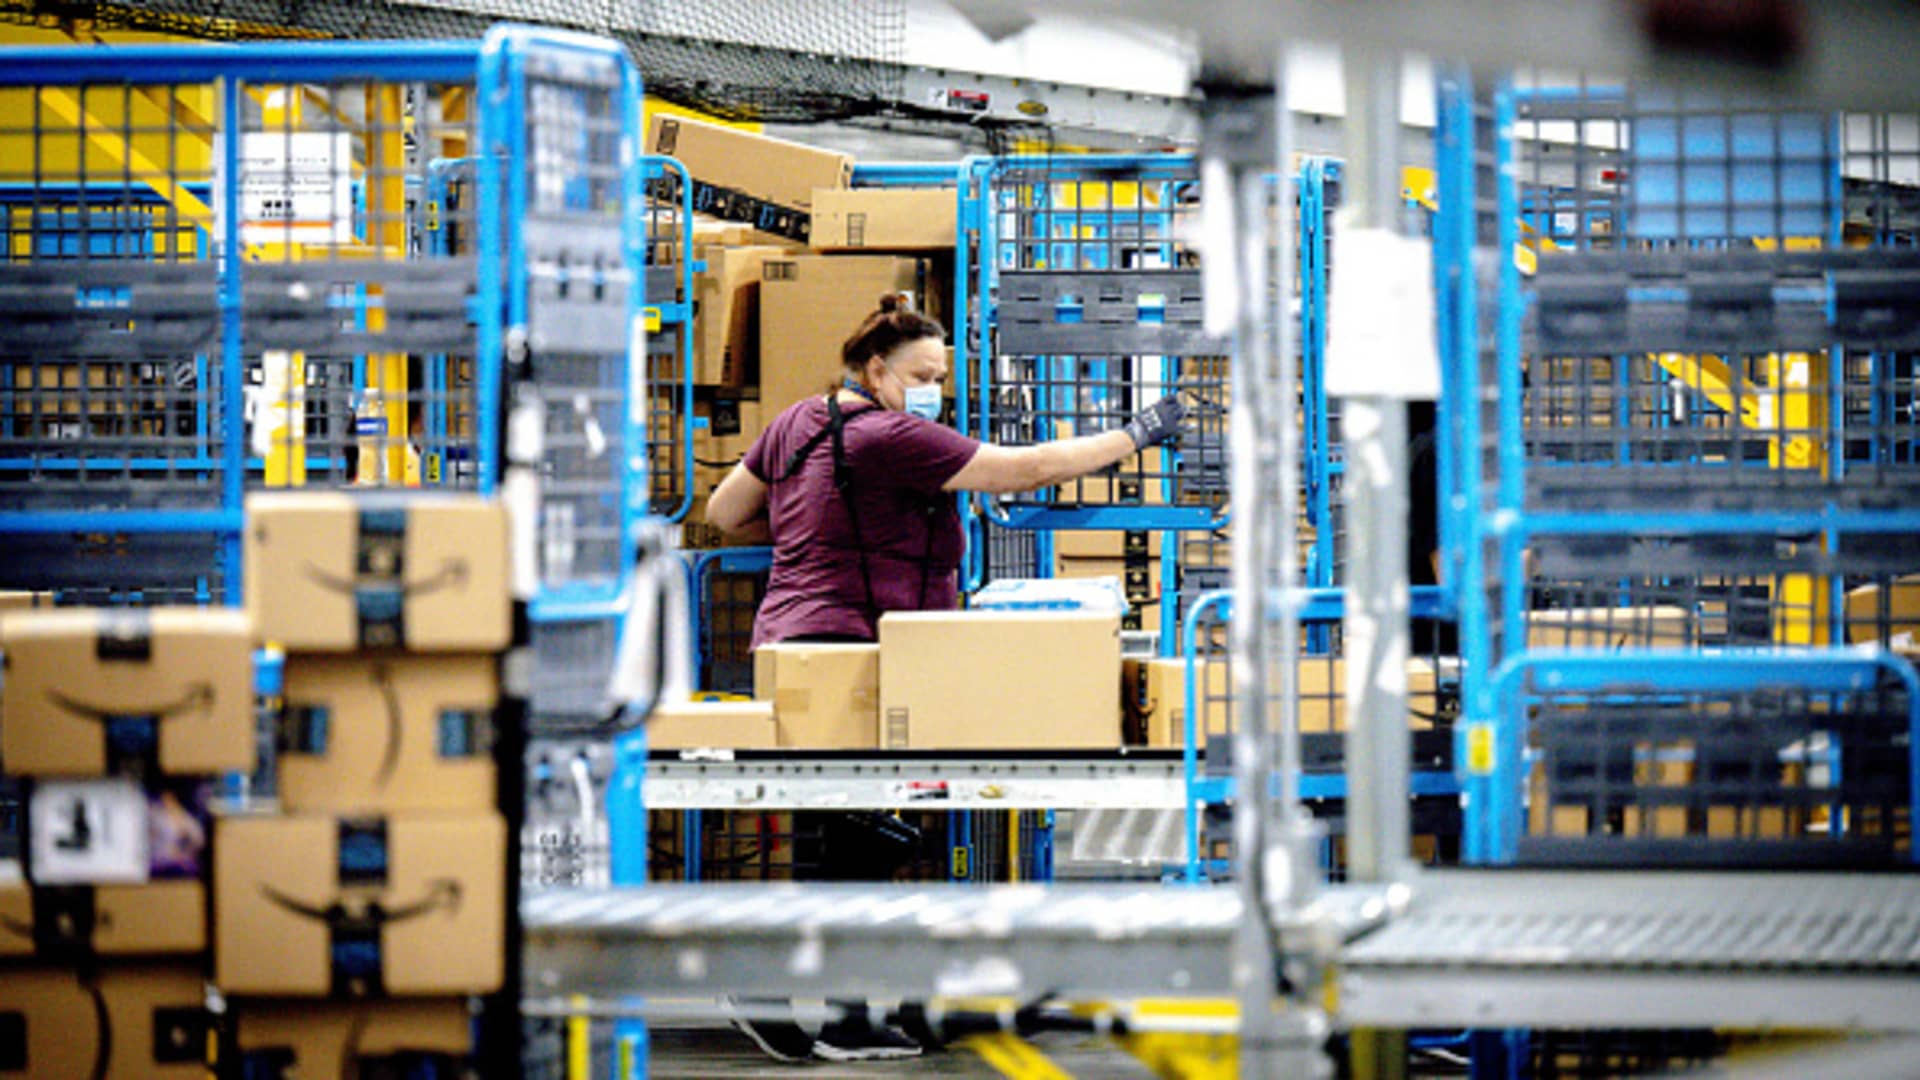 Amazon says more than 300 million items sold during 'biggest' Prime Day event - CNBC